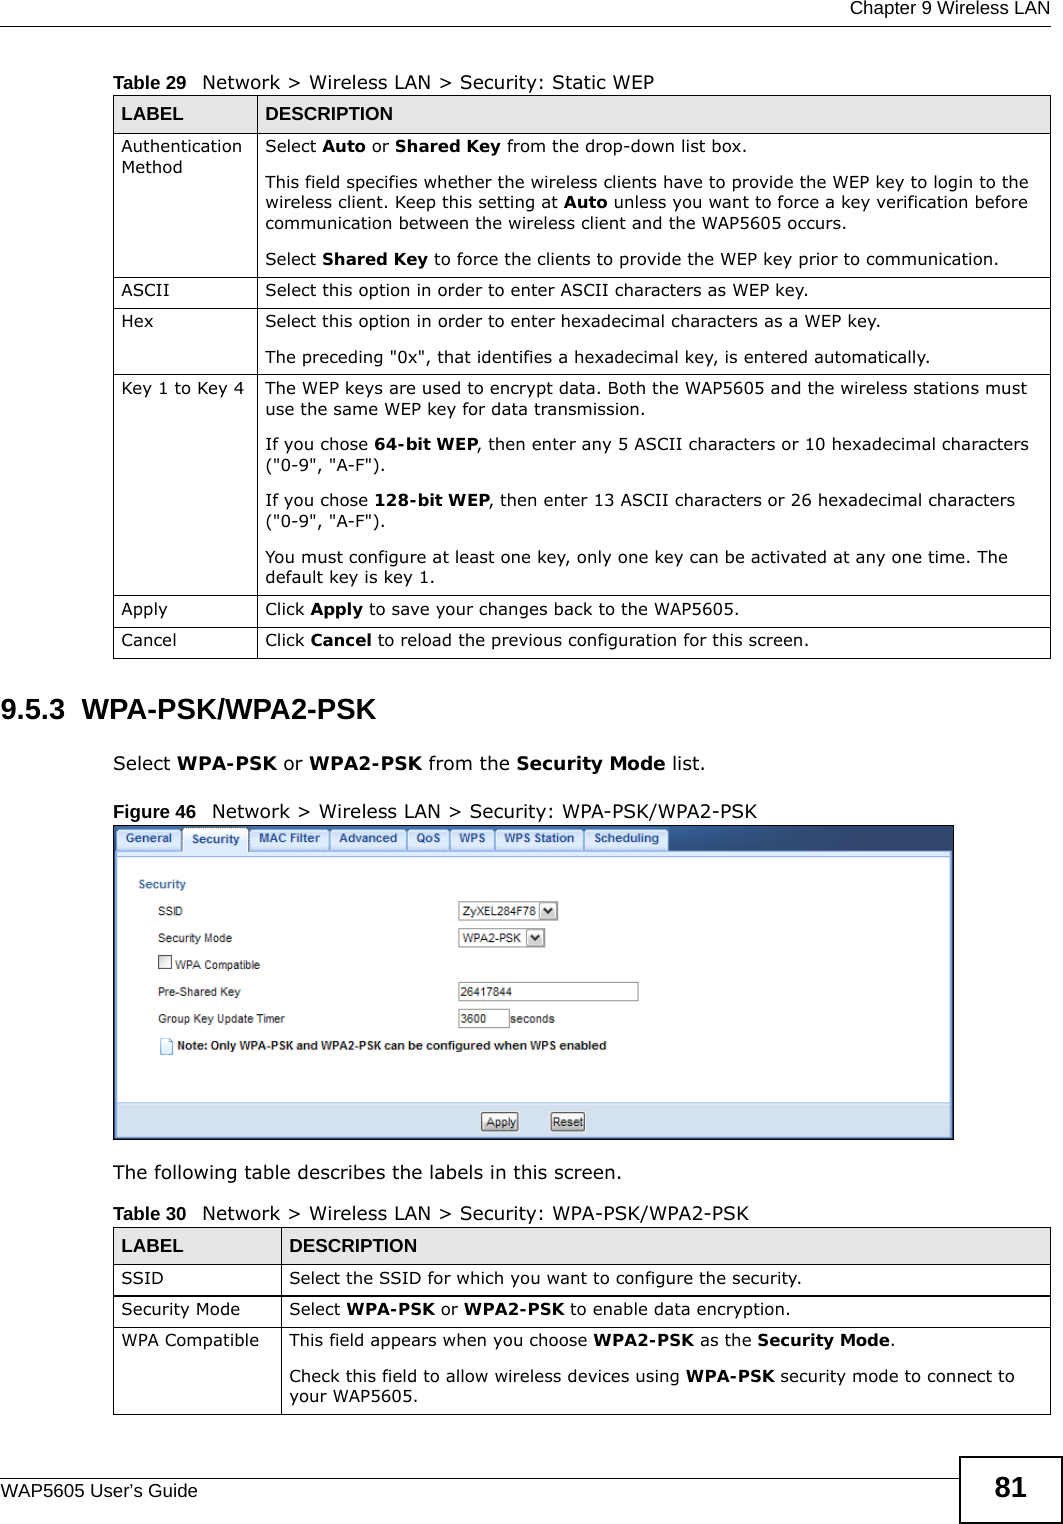  Chapter 9 Wireless LANWAP5605 User’s Guide 819.5.3  WPA-PSK/WPA2-PSKSelect WPA-PSK or WPA2-PSK from the Security Mode list.Figure 46   Network &gt; Wireless LAN &gt; Security: WPA-PSK/WPA2-PSKThe following table describes the labels in this screen.Authentication MethodSelect Auto or Shared Key from the drop-down list box.This field specifies whether the wireless clients have to provide the WEP key to login to the wireless client. Keep this setting at Auto unless you want to force a key verification before communication between the wireless client and the WAP5605 occurs. Select Shared Key to force the clients to provide the WEP key prior to communication.  ASCII Select this option in order to enter ASCII characters as WEP key. Hex Select this option in order to enter hexadecimal characters as a WEP key. The preceding &quot;0x&quot;, that identifies a hexadecimal key, is entered automatically.Key 1 to Key 4 The WEP keys are used to encrypt data. Both the WAP5605 and the wireless stations must use the same WEP key for data transmission.If you chose 64-bit WEP, then enter any 5 ASCII characters or 10 hexadecimal characters (&quot;0-9&quot;, &quot;A-F&quot;).If you chose 128-bit WEP, then enter 13 ASCII characters or 26 hexadecimal characters (&quot;0-9&quot;, &quot;A-F&quot;). You must configure at least one key, only one key can be activated at any one time. The default key is key 1.Apply Click Apply to save your changes back to the WAP5605.Cancel Click Cancel to reload the previous configuration for this screen.Table 29   Network &gt; Wireless LAN &gt; Security: Static WEPLABEL DESCRIPTIONTable 30   Network &gt; Wireless LAN &gt; Security: WPA-PSK/WPA2-PSKLABEL DESCRIPTIONSSID Select the SSID for which you want to configure the security.Security Mode Select WPA-PSK or WPA2-PSK to enable data encryption.WPA Compatible This field appears when you choose WPA2-PSK as the Security Mode.Check this field to allow wireless devices using WPA-PSK security mode to connect to your WAP5605.